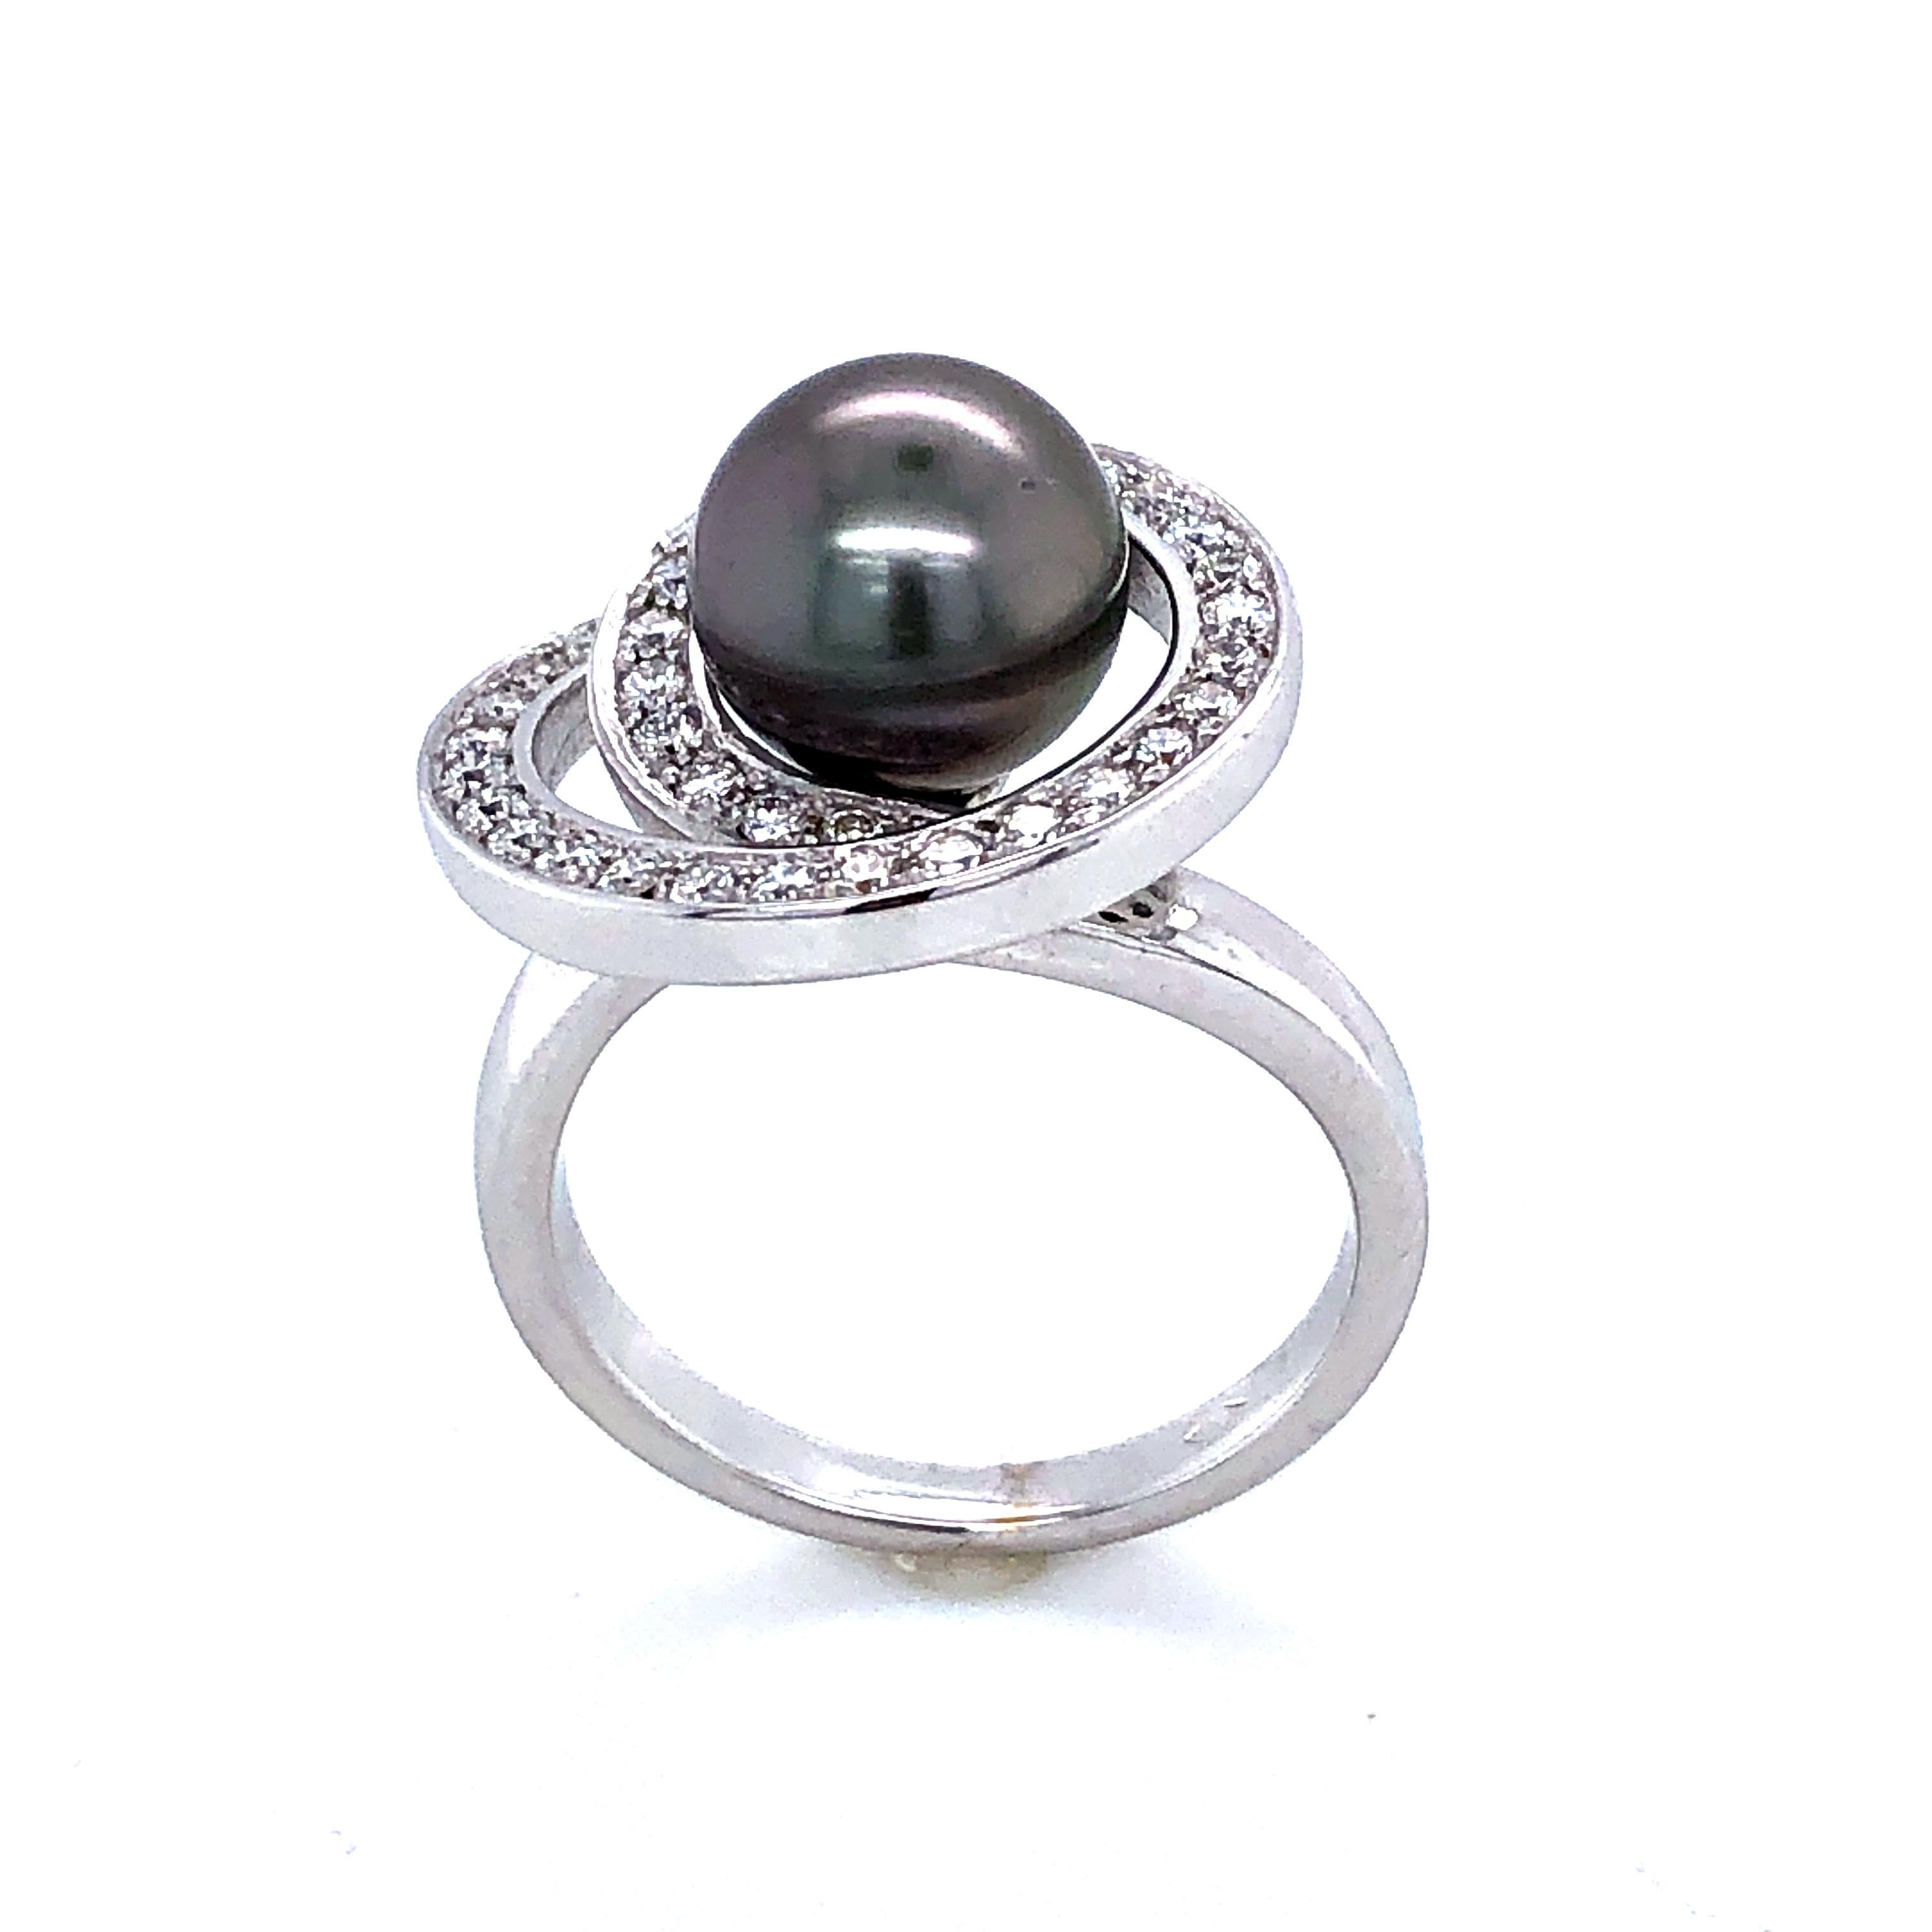 Tahiti pearl and diamonds on White Gold Ring 18 k
Diamonds Snail With Tahiti Pearl on Central Ring 
Diamonds : 0.47 ct 
Size of Tahiti pearl : 9/9.5 m
Weight Of Gold : 7.91
French Size :52.5
US Sise :6.5
British Size : M.5